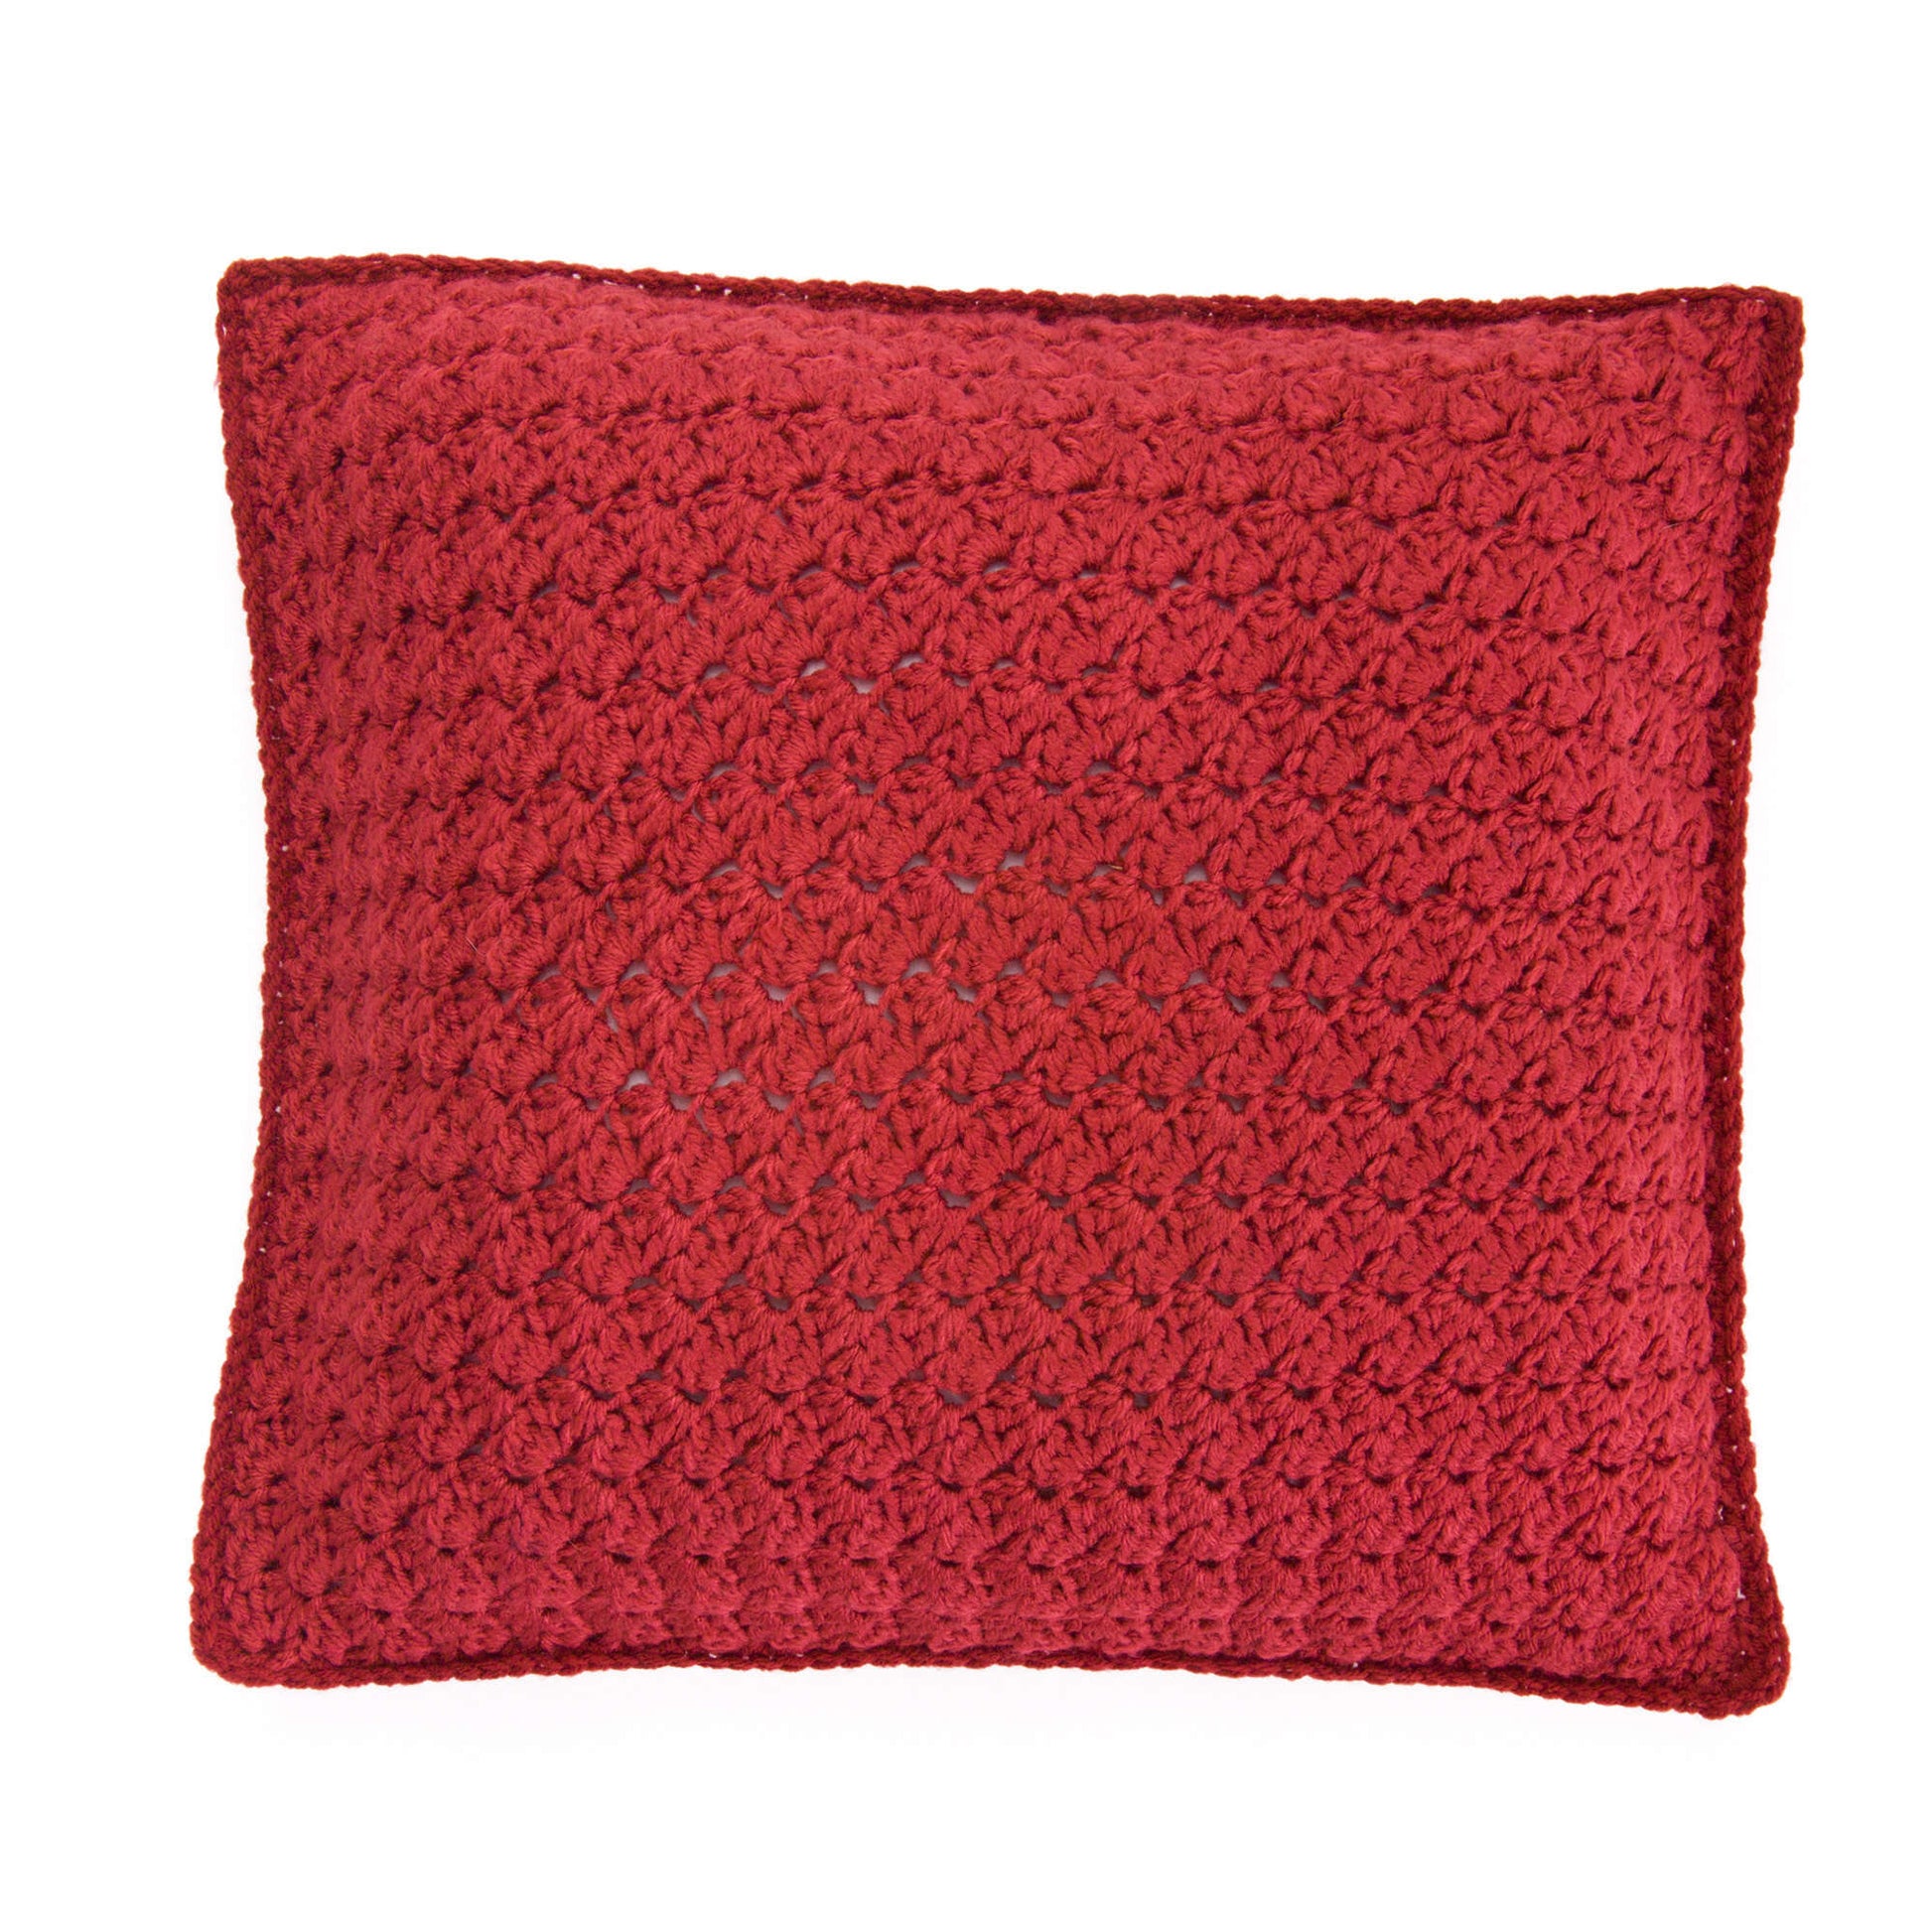 Free Red Heart Textured Pillow Trio Pattern